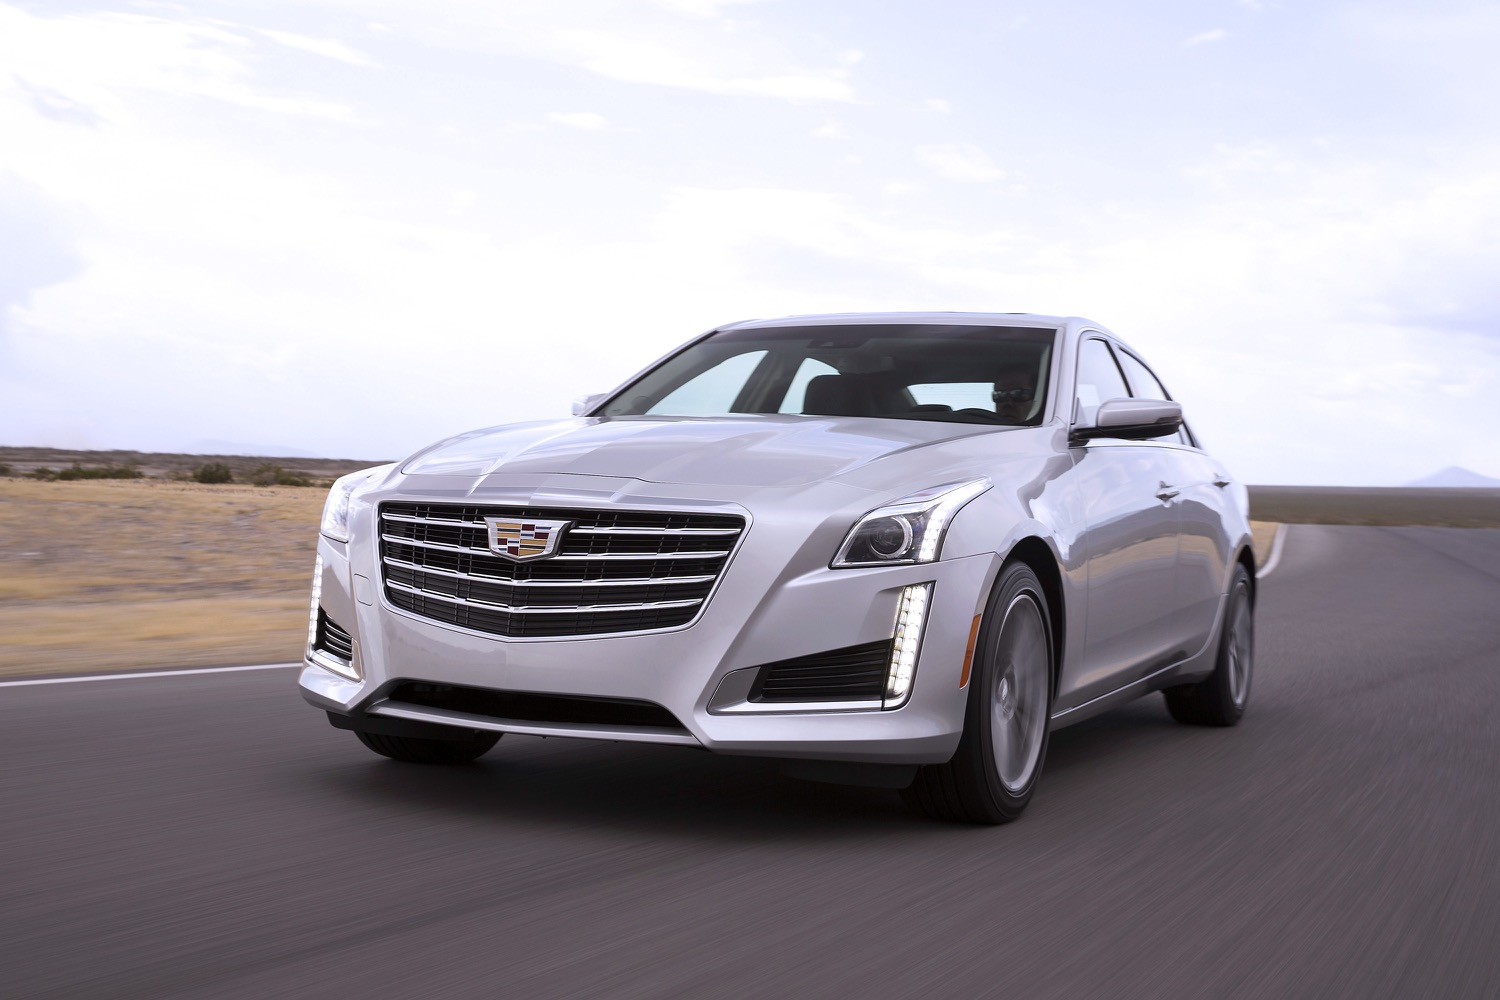 2017 Cadillac CTS vs. 2016 Cadillac CTS: Which Rear Fascia Design Do You Pr...